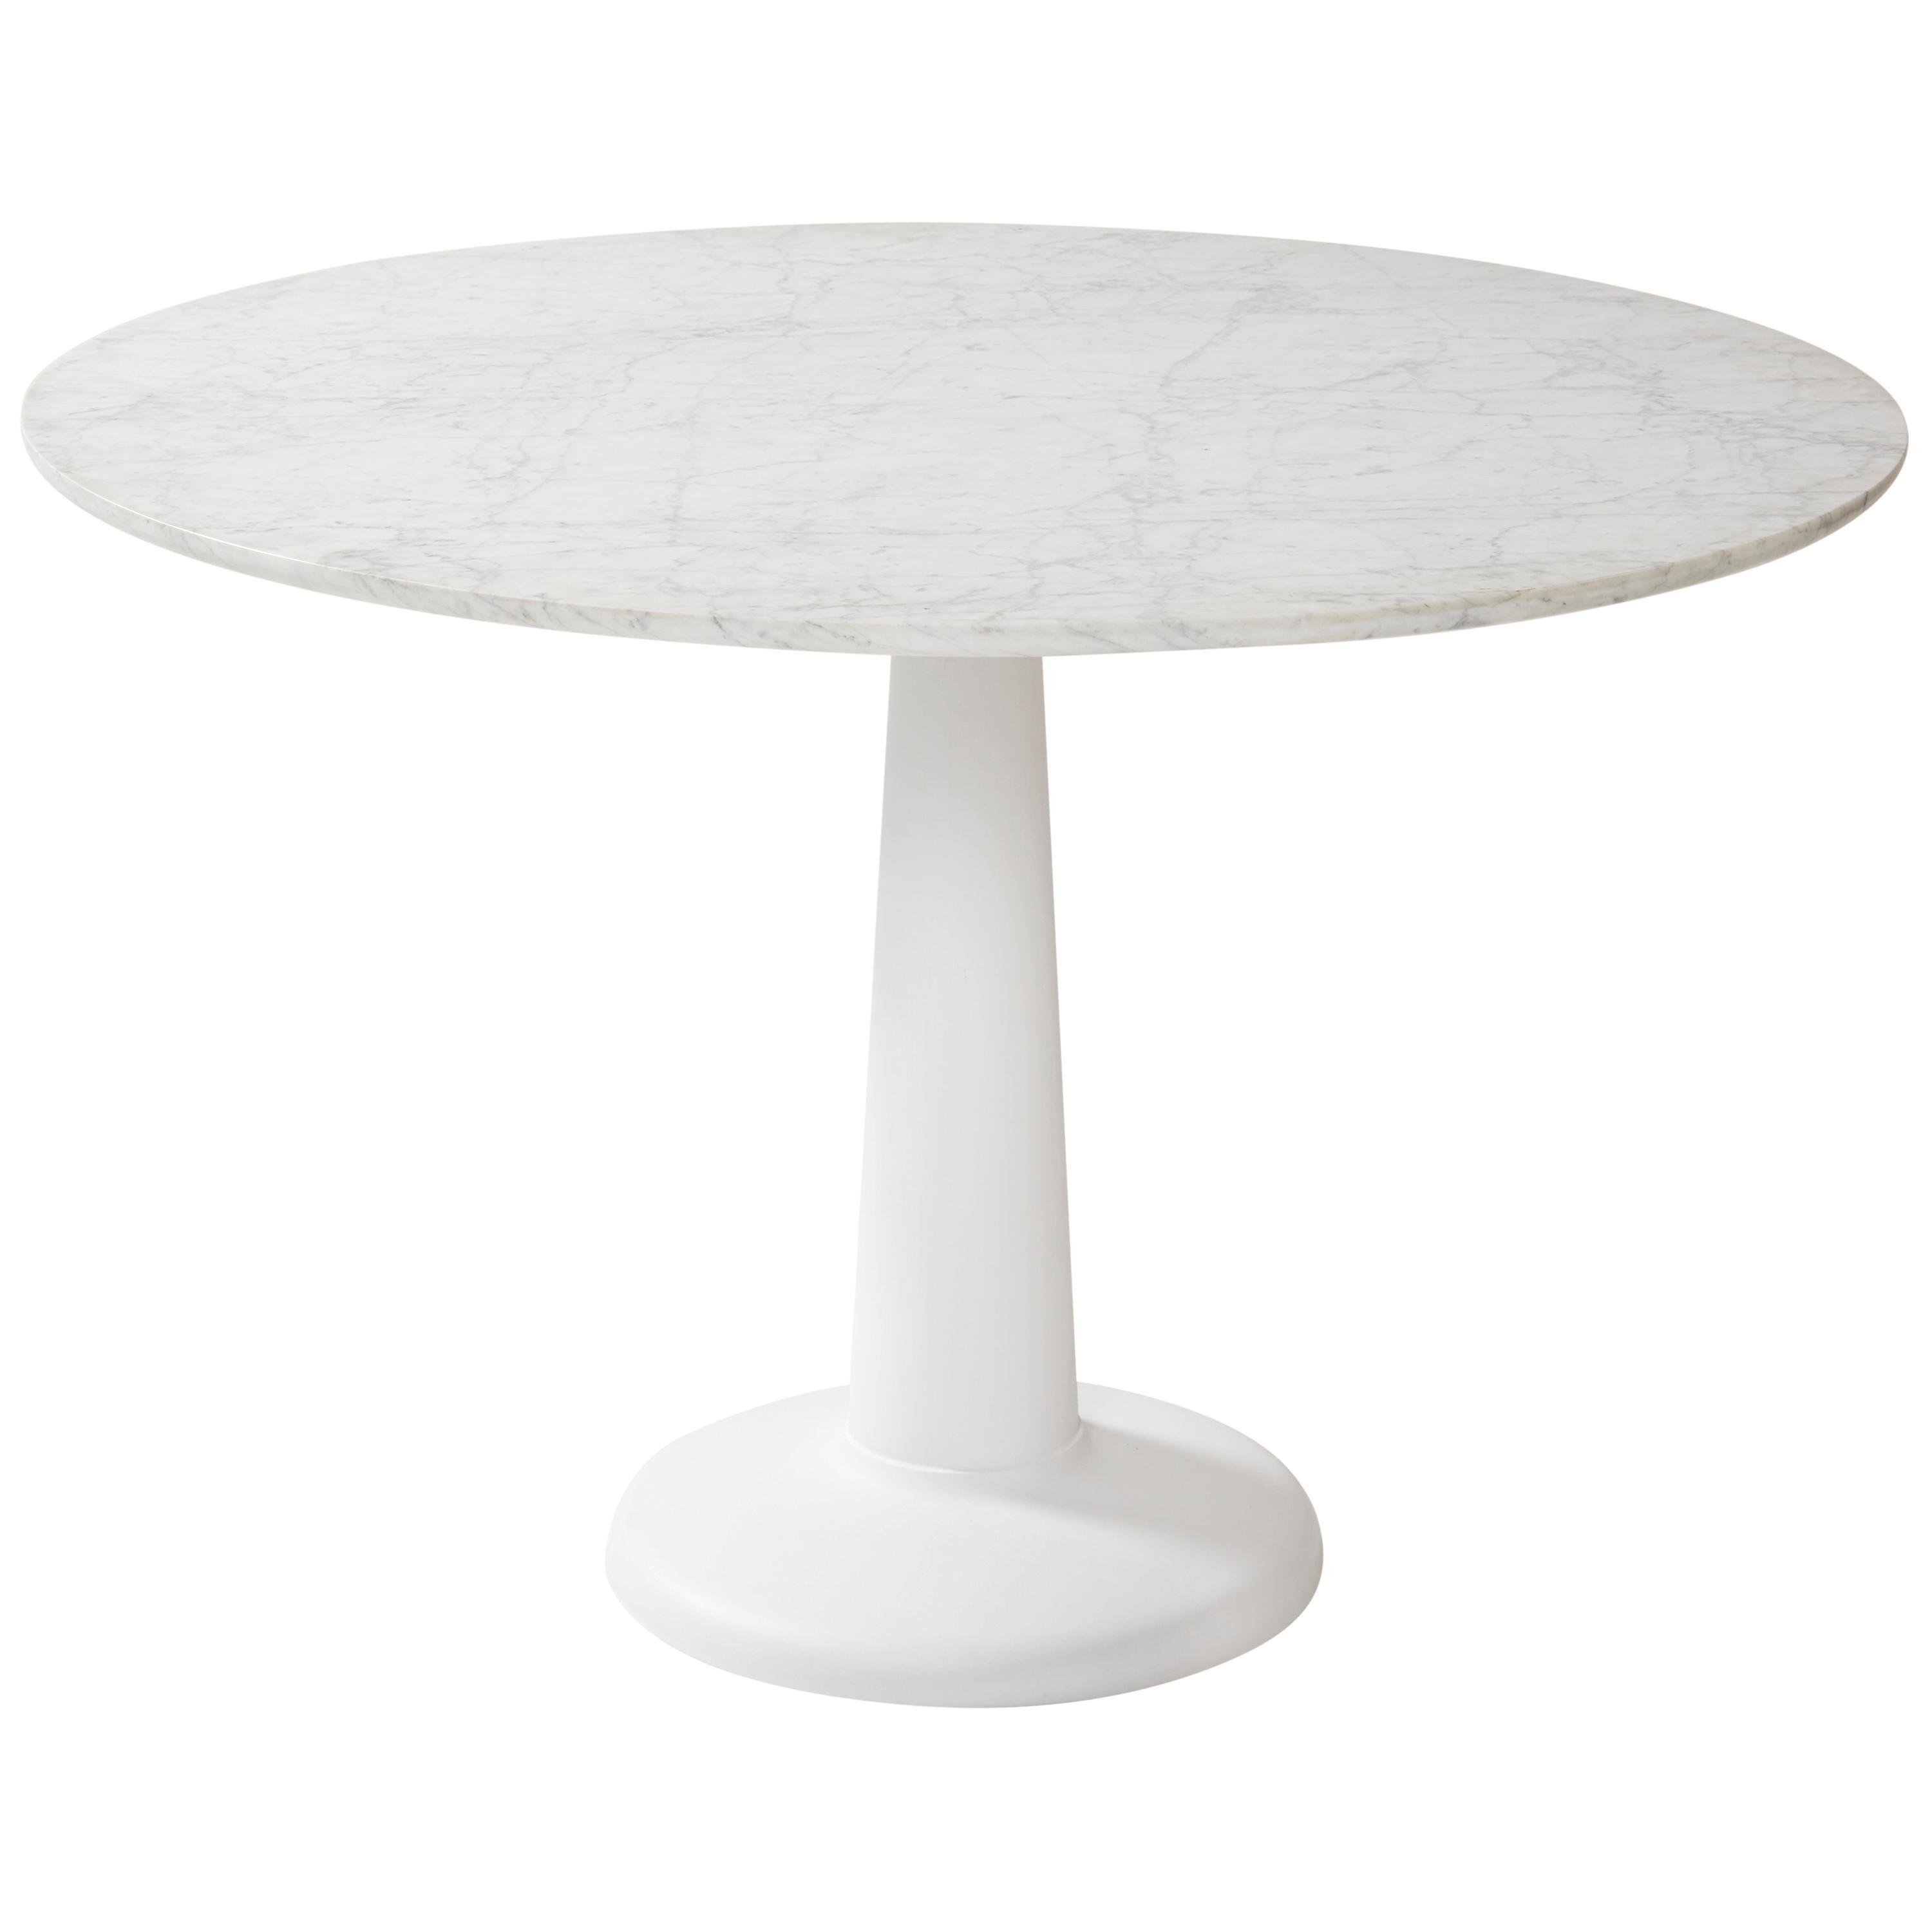 For Sale: White (Blanc) G Plateau Table with Marble Top in Essential Colors by Chantal Andriot & Tolix